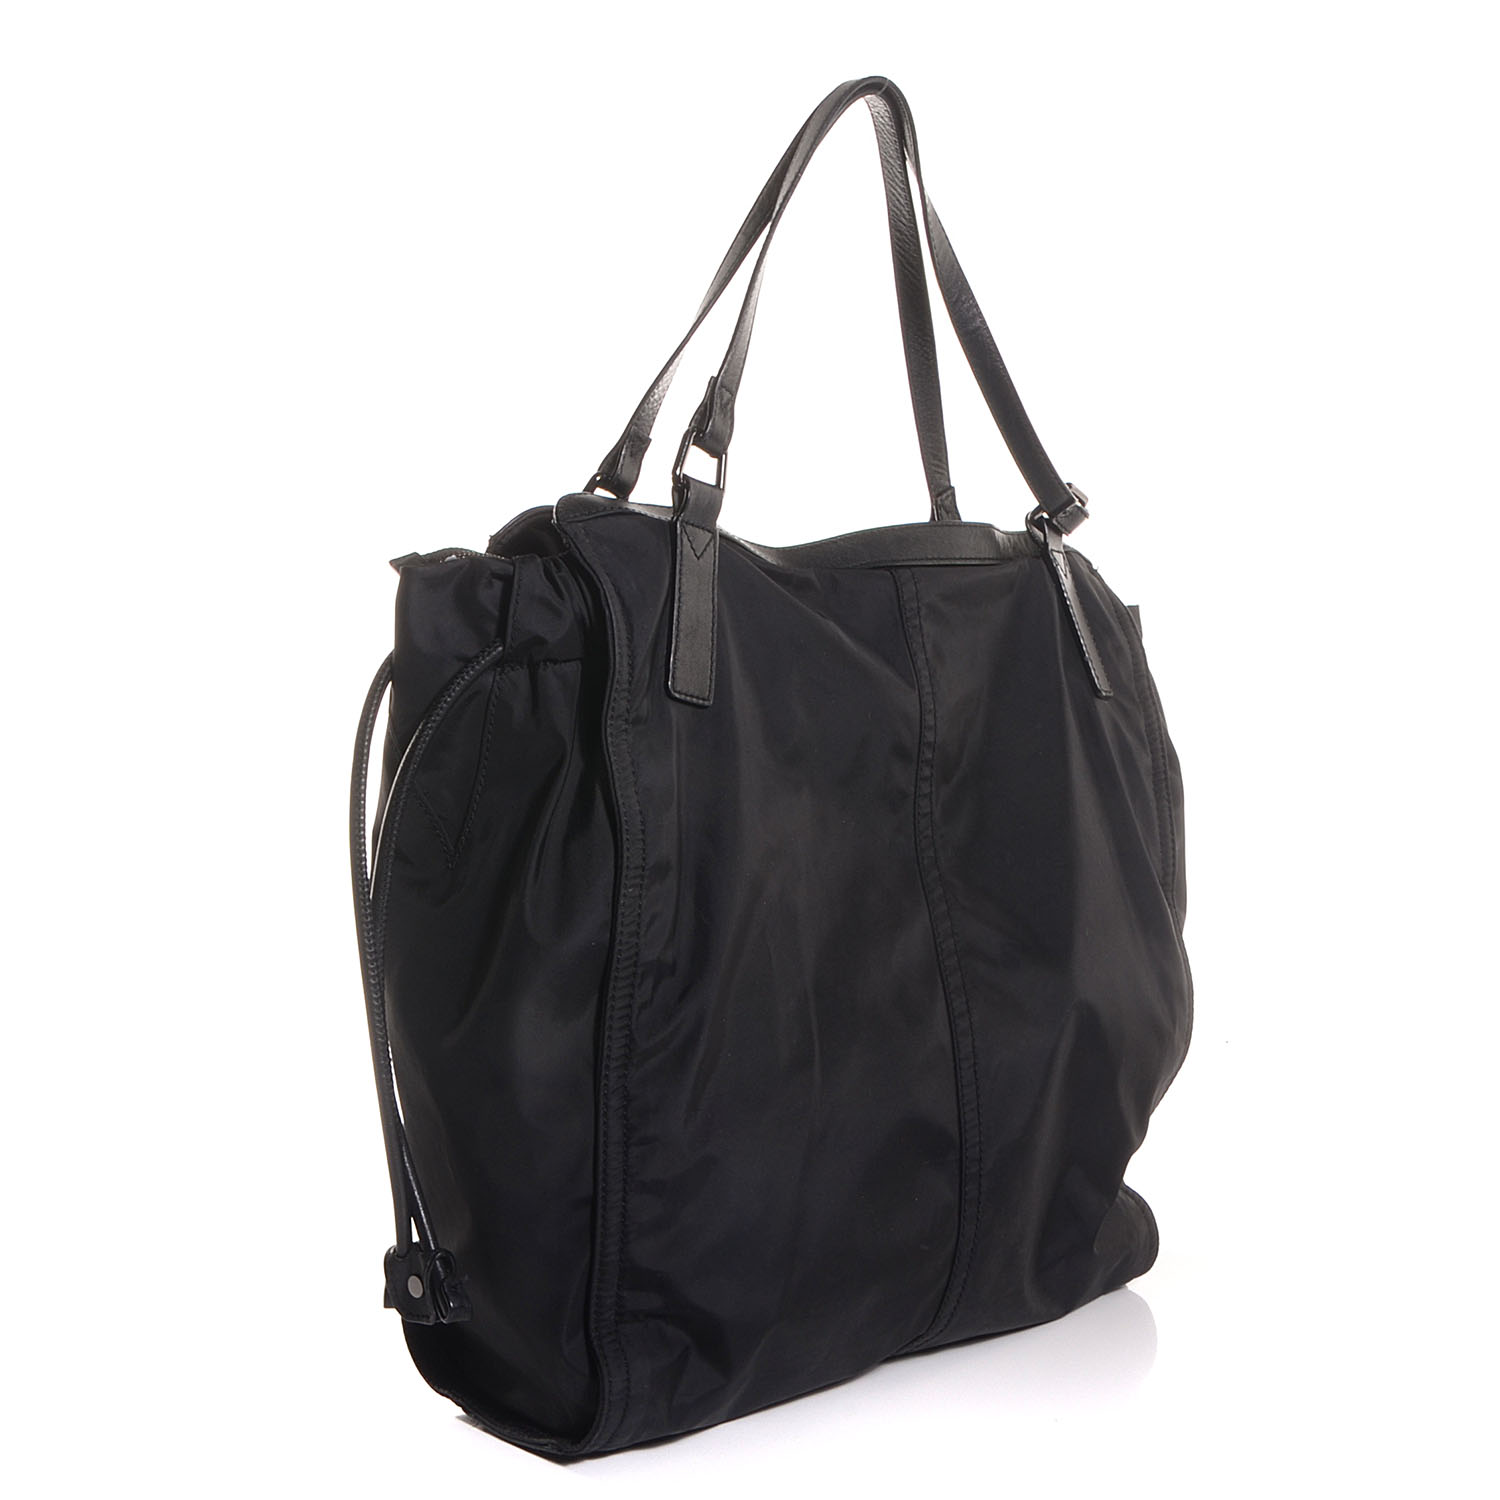 BURBERRY Nylon Buckleigh Packable Tote Black 84992